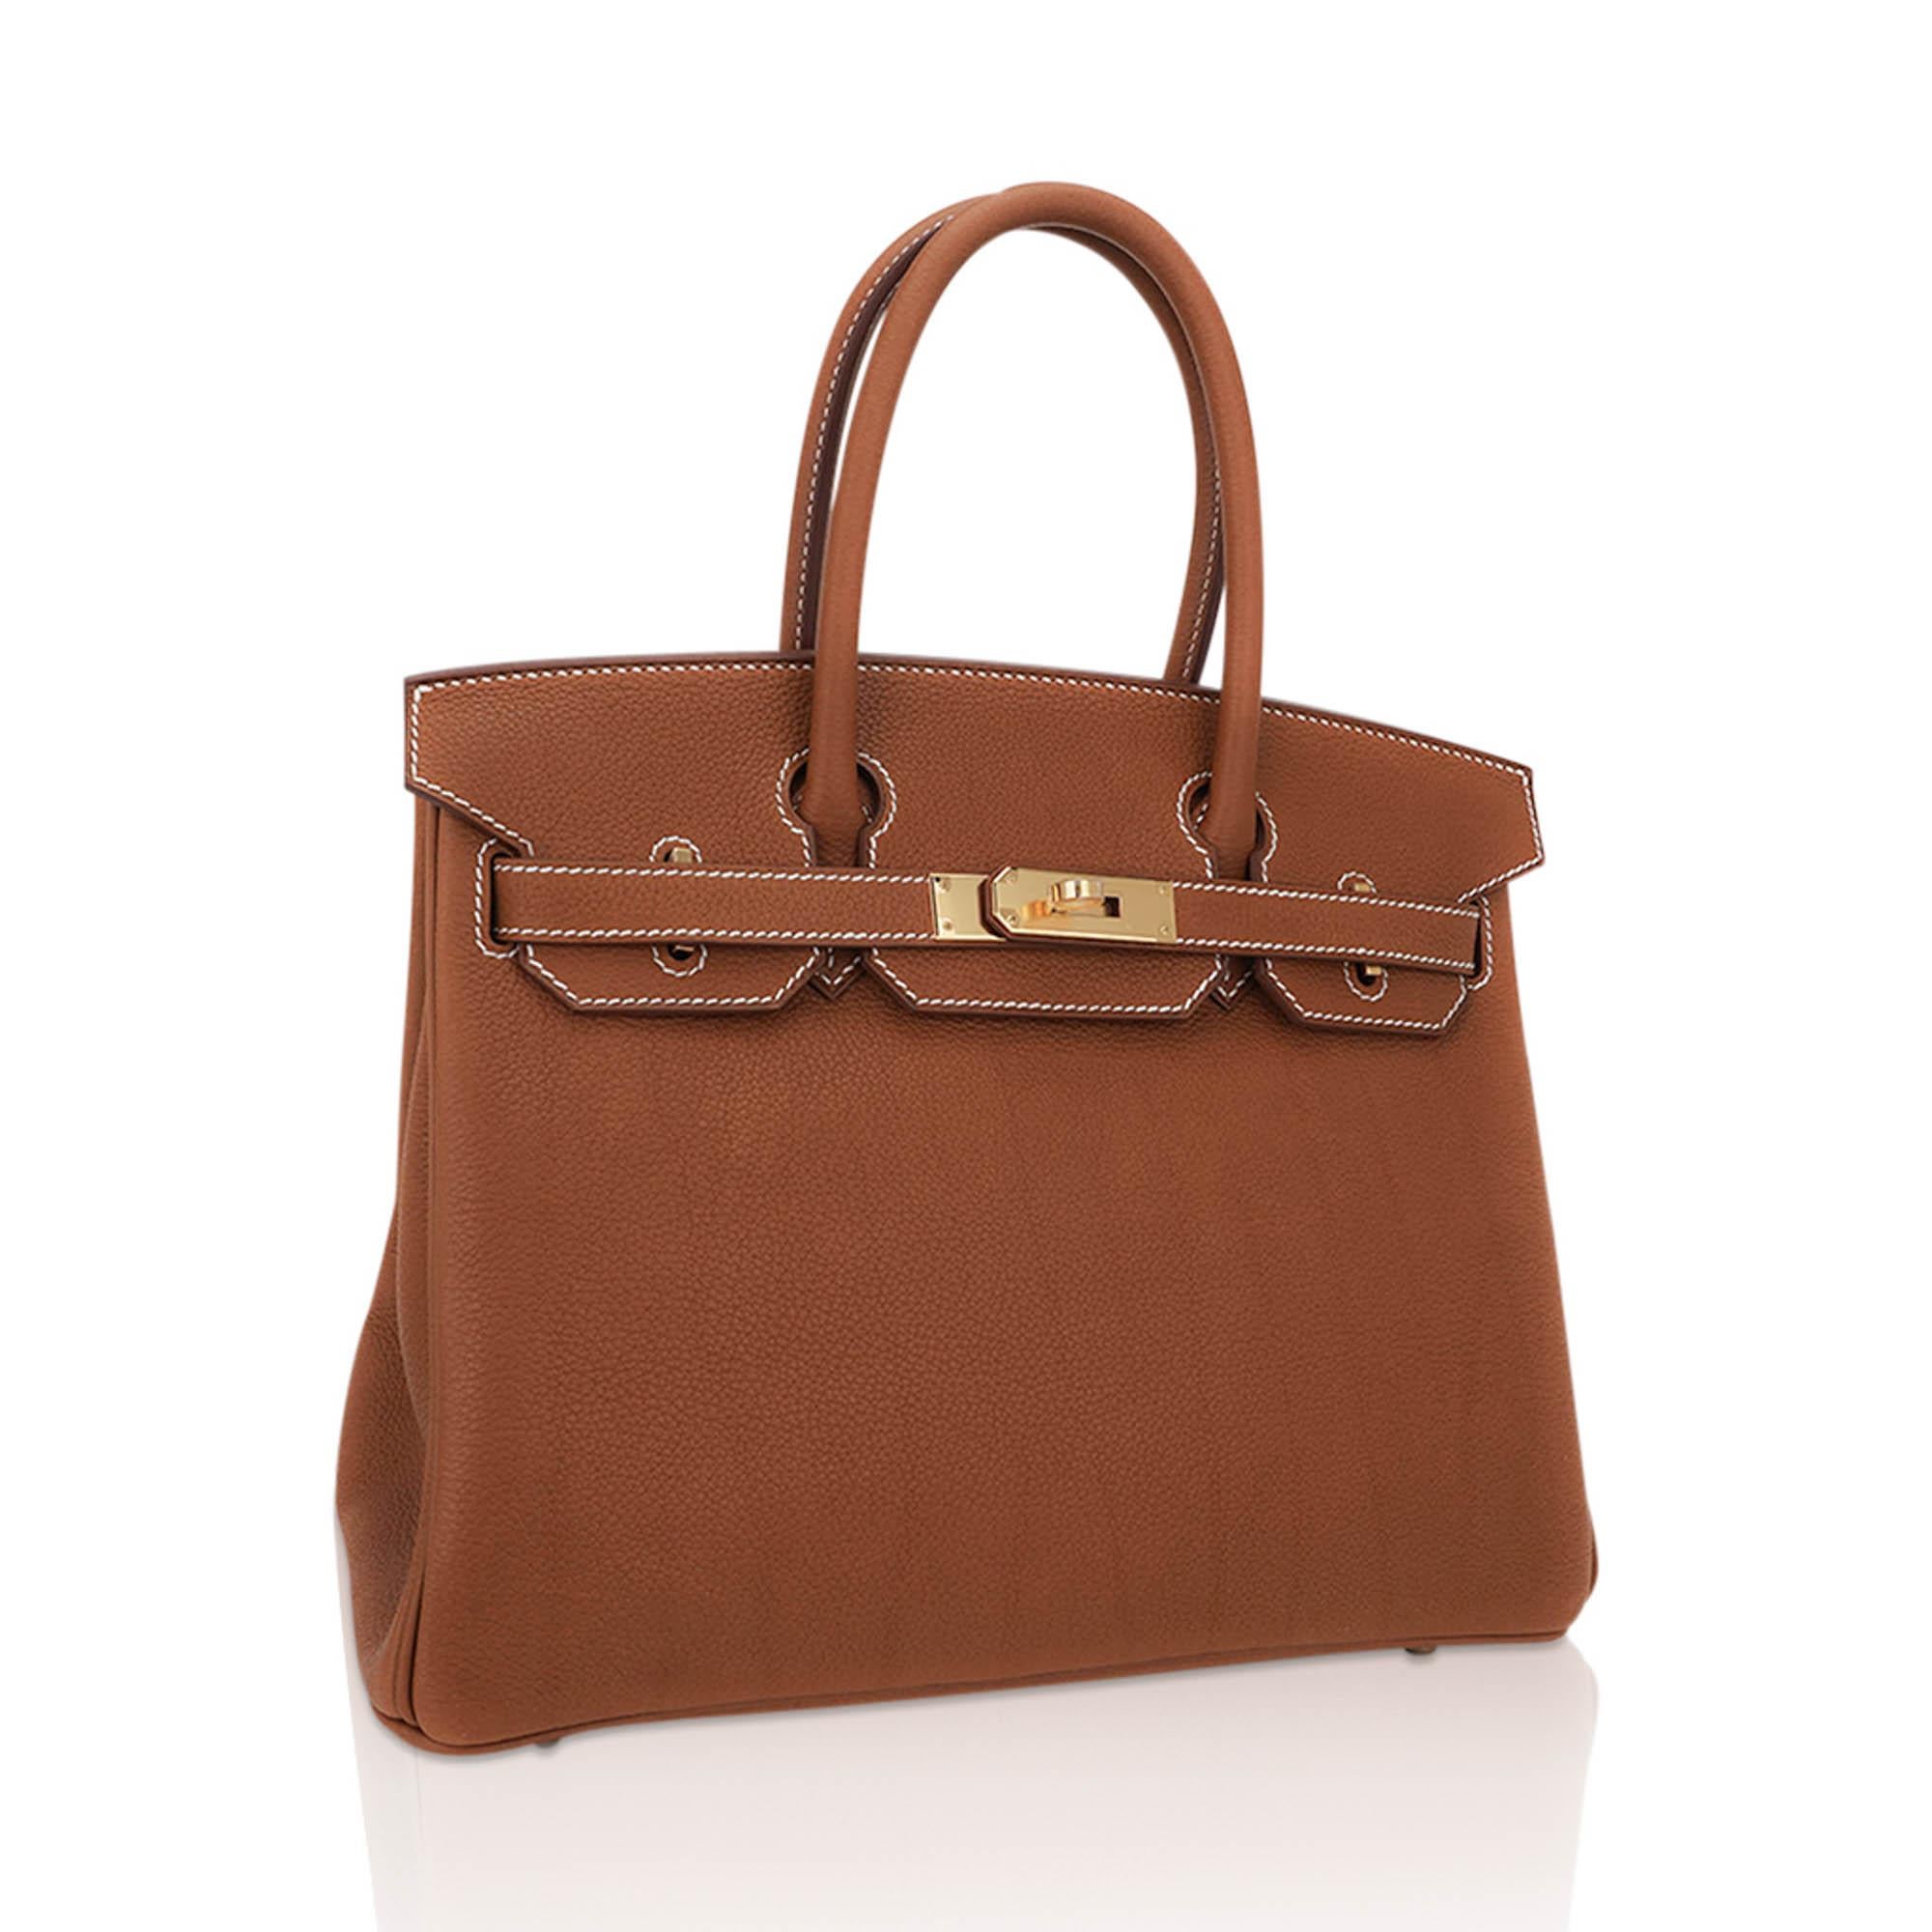 Mightychic offers an Hermes Birkin 30 bag featured in rare Fauve Barenia Faubourg which has a velvety soft hand.
This coveted Fauve golden brown Birkin bag in rare Barenia Faubourg Hermes leather with its gently textured finish is beyond